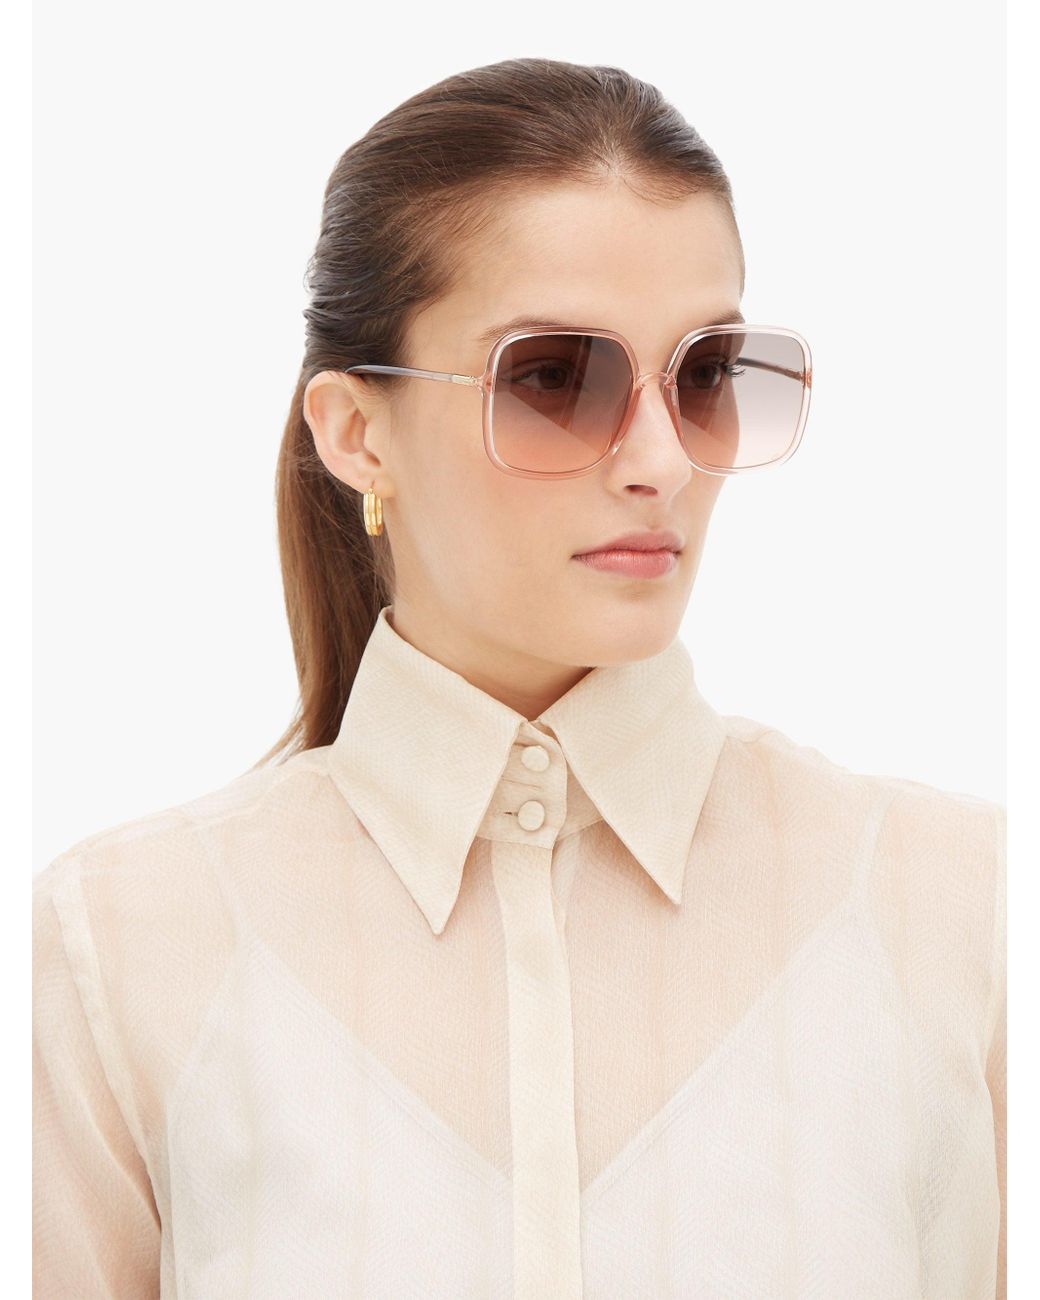 Dior on Twitter Be en pointe with the new Dior Stellaire sunglasses  from the danceinspired SpringSummer 2019 collection by  MariaGraziaChiuri Check out the superlight frames  httpstcoNdI4yLc1HD DiorSS19 httpstcoGHg48BtLFS  Twitter